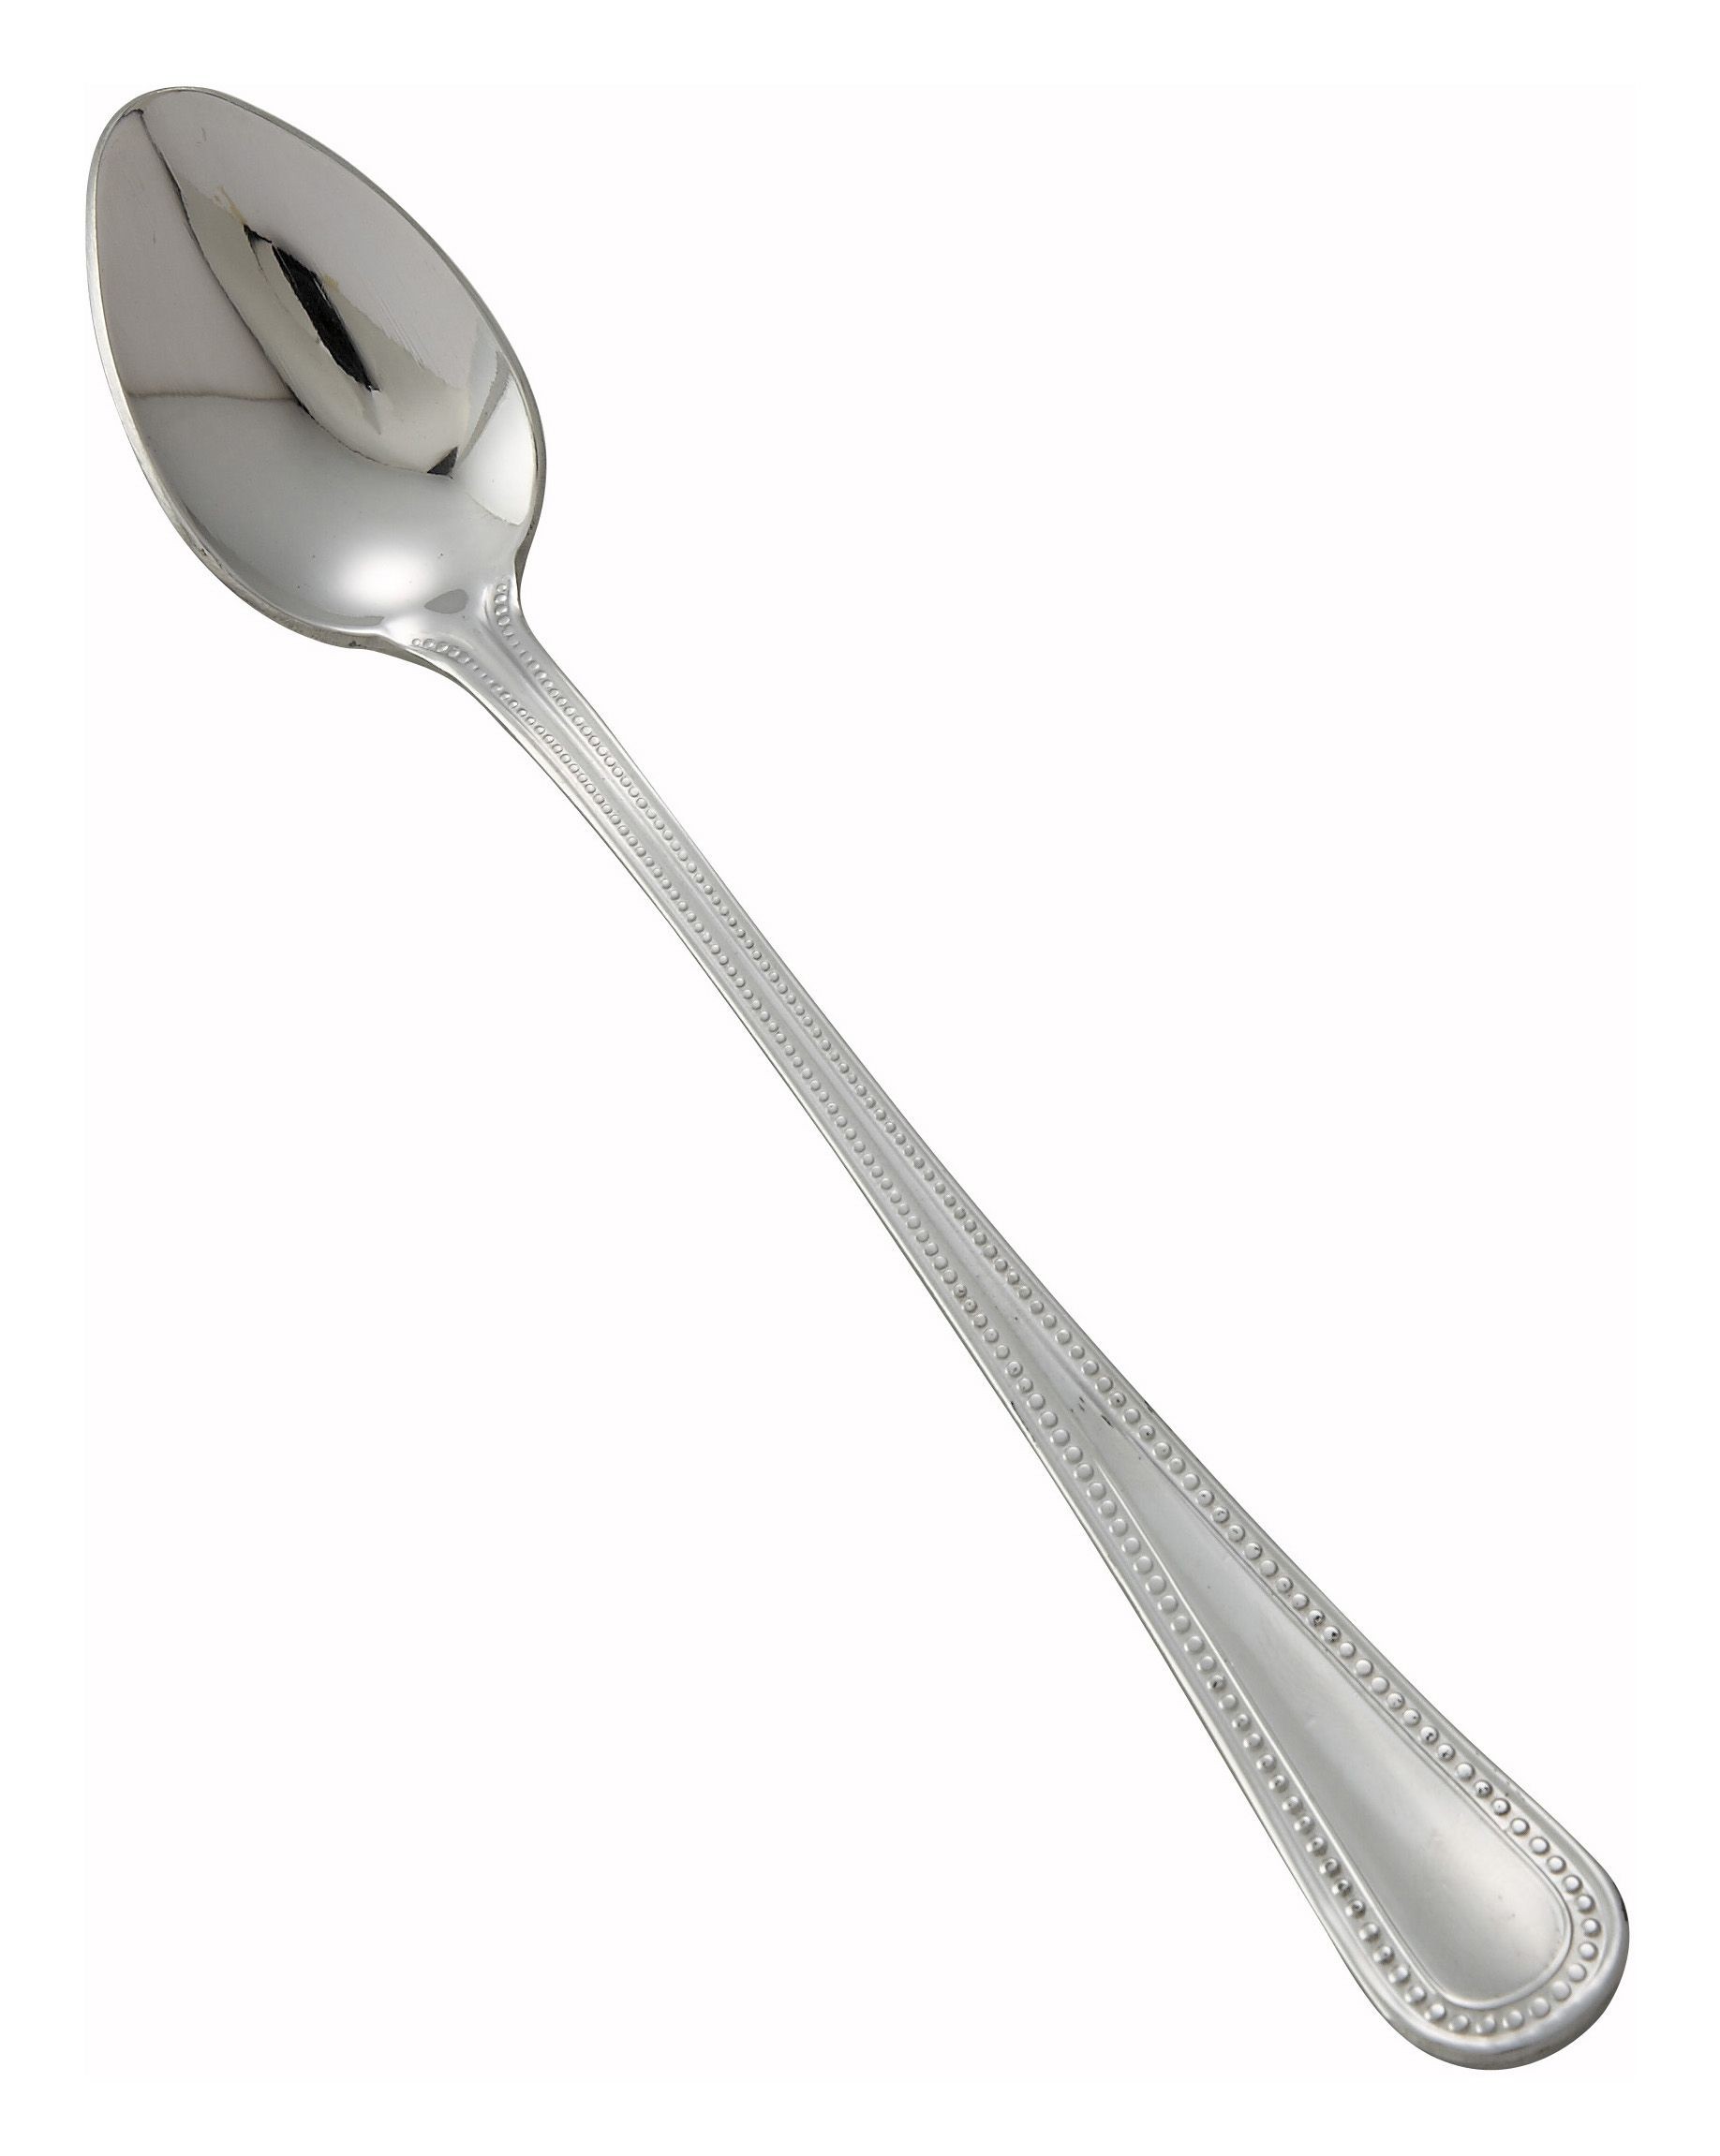 Winco 0036-02 Deluxe Pearl Extra Heavy Stainless Steel Iced Teaspoon (12/Pack)